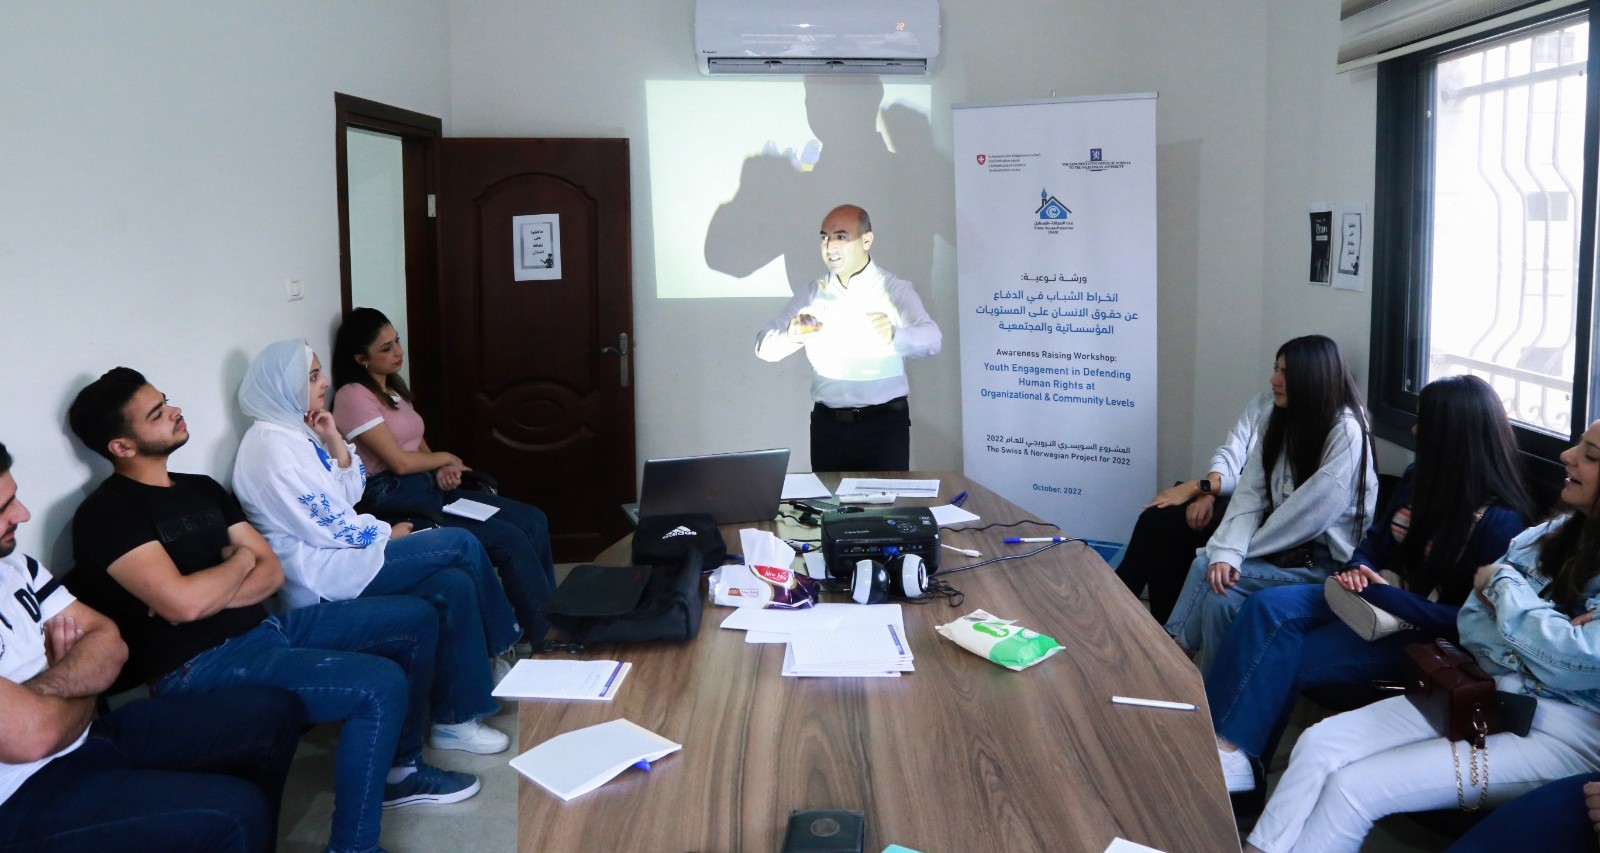 Nablus: Press House holds an awareness workshop on "Youth Engagement in Defending Human Rights at Organizational & Community Levels"